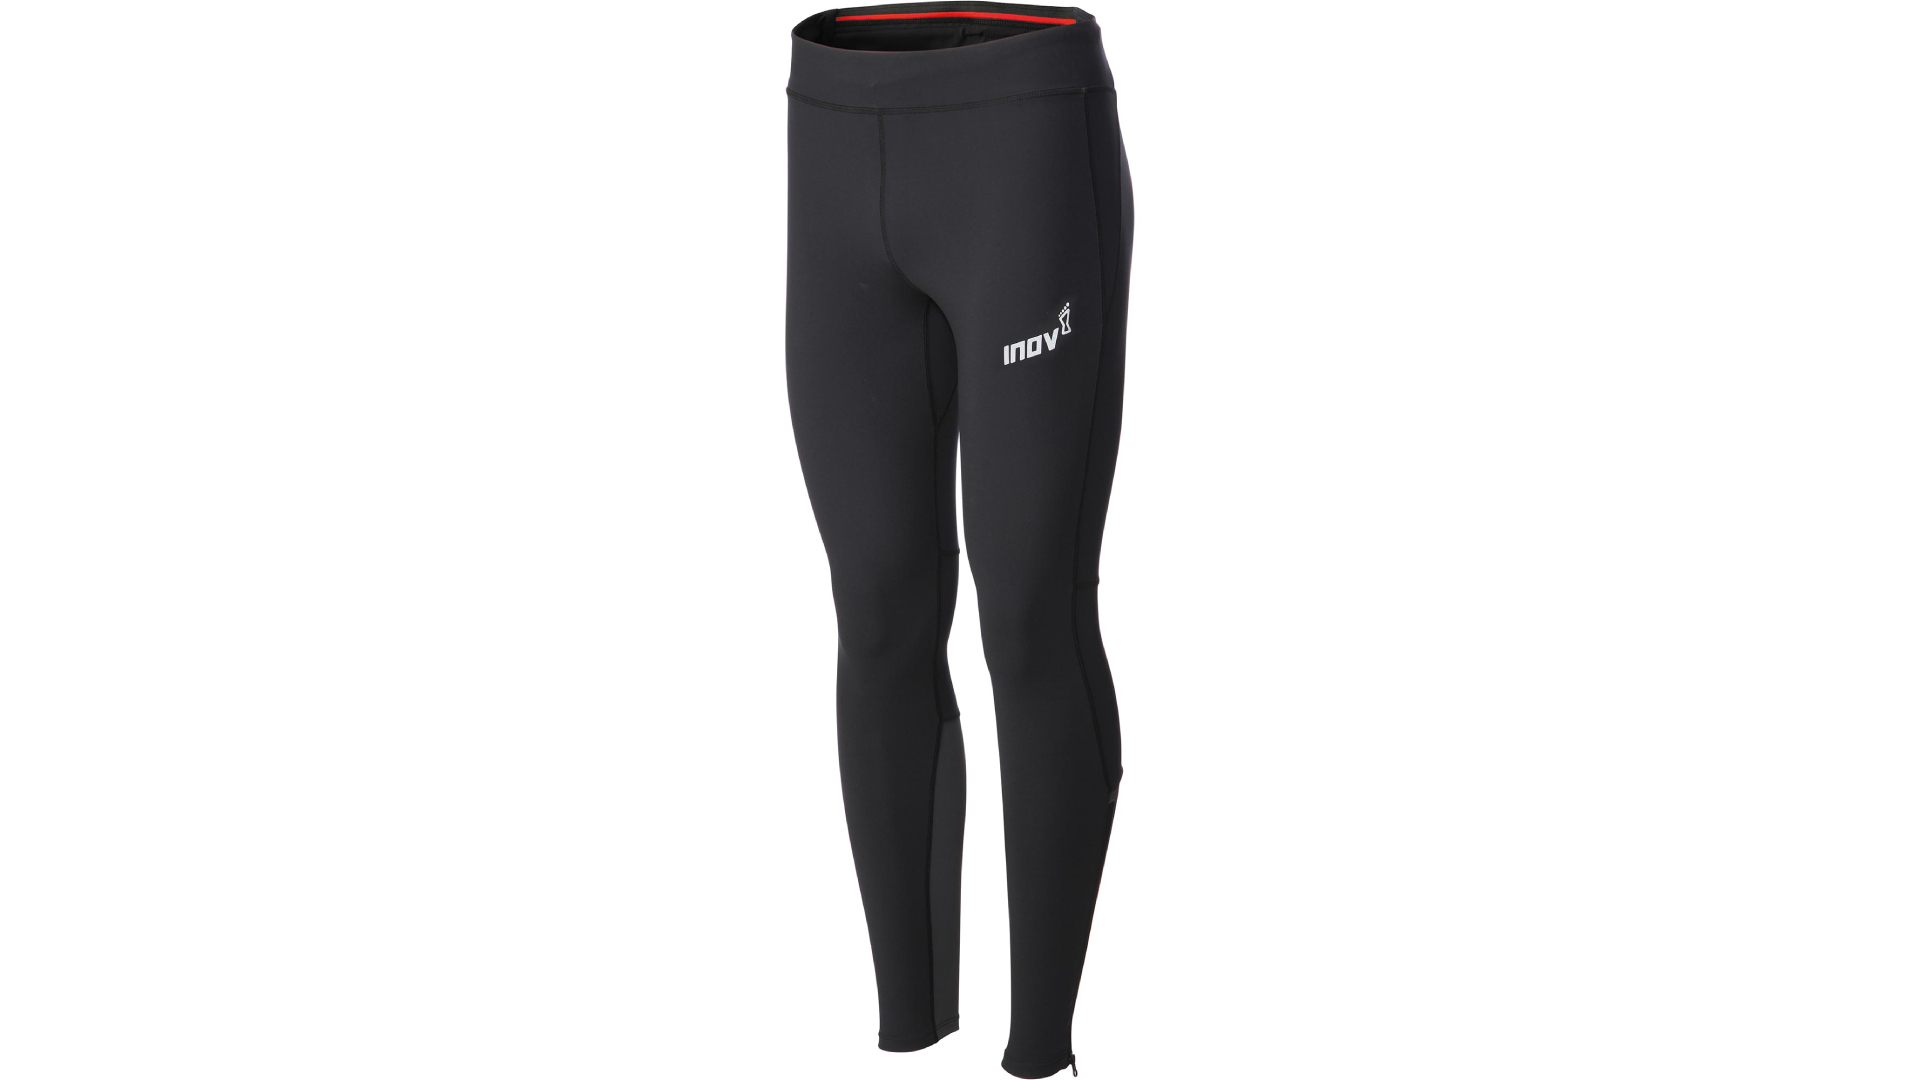 Inov8 Womens Race Elite Gym Running Tights Bottoms Pants Trousers Black Sports 